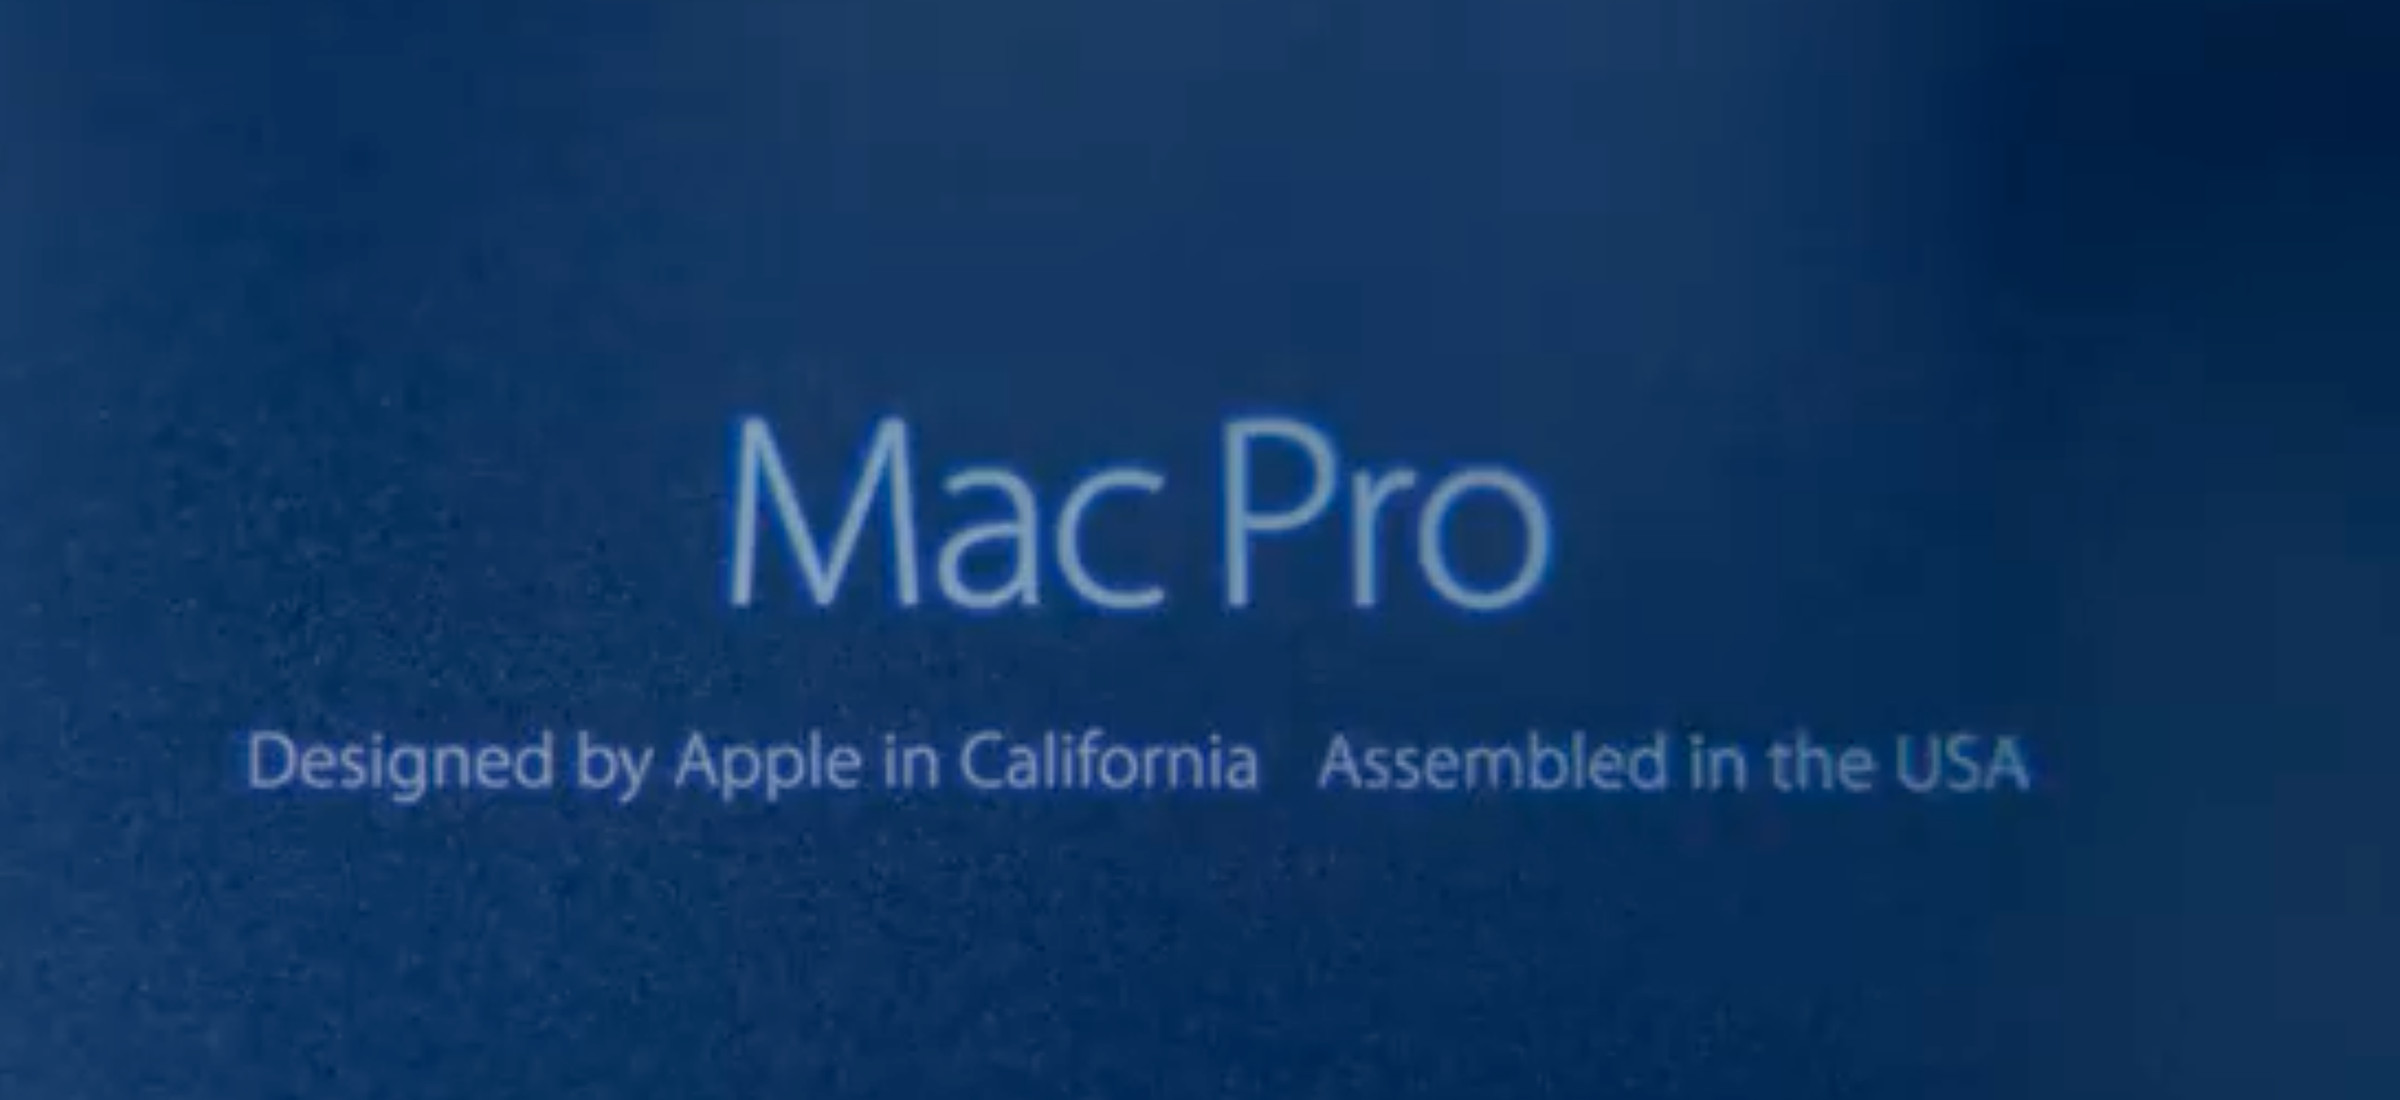 The previous Mac Pro was assembled in the United States.